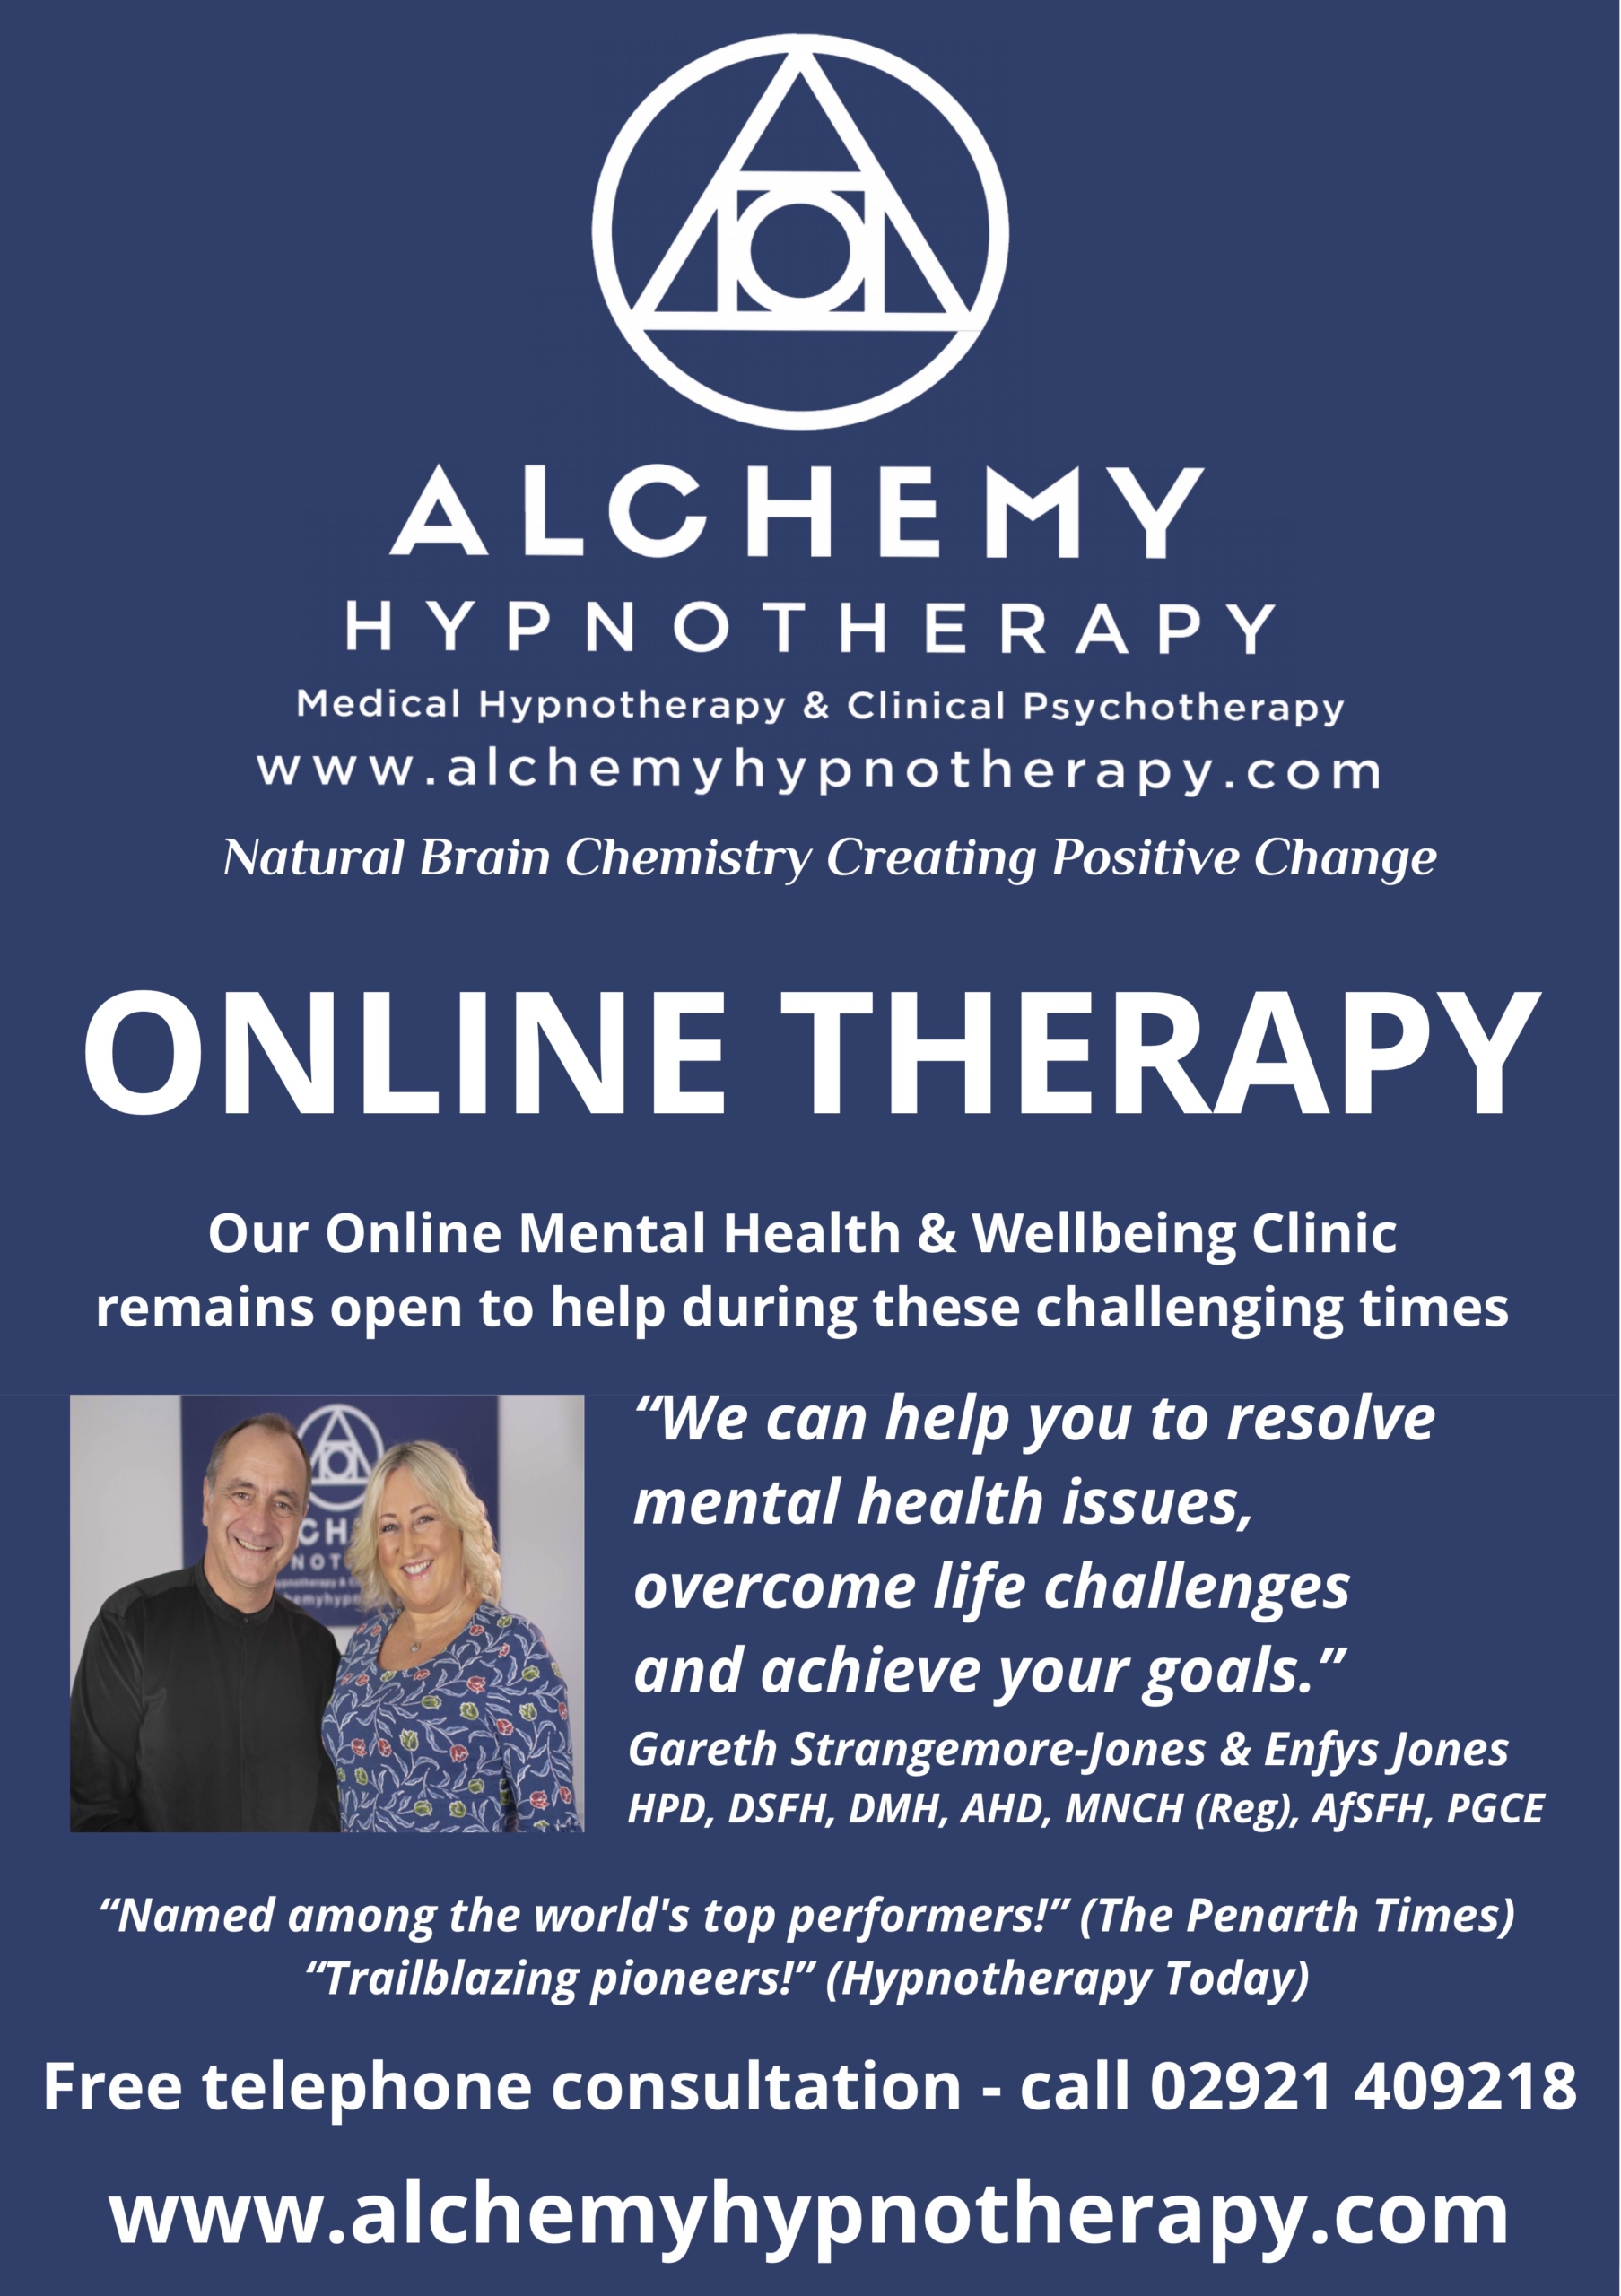 WE ARE OPEN OFFERING ONLINE THERAPY